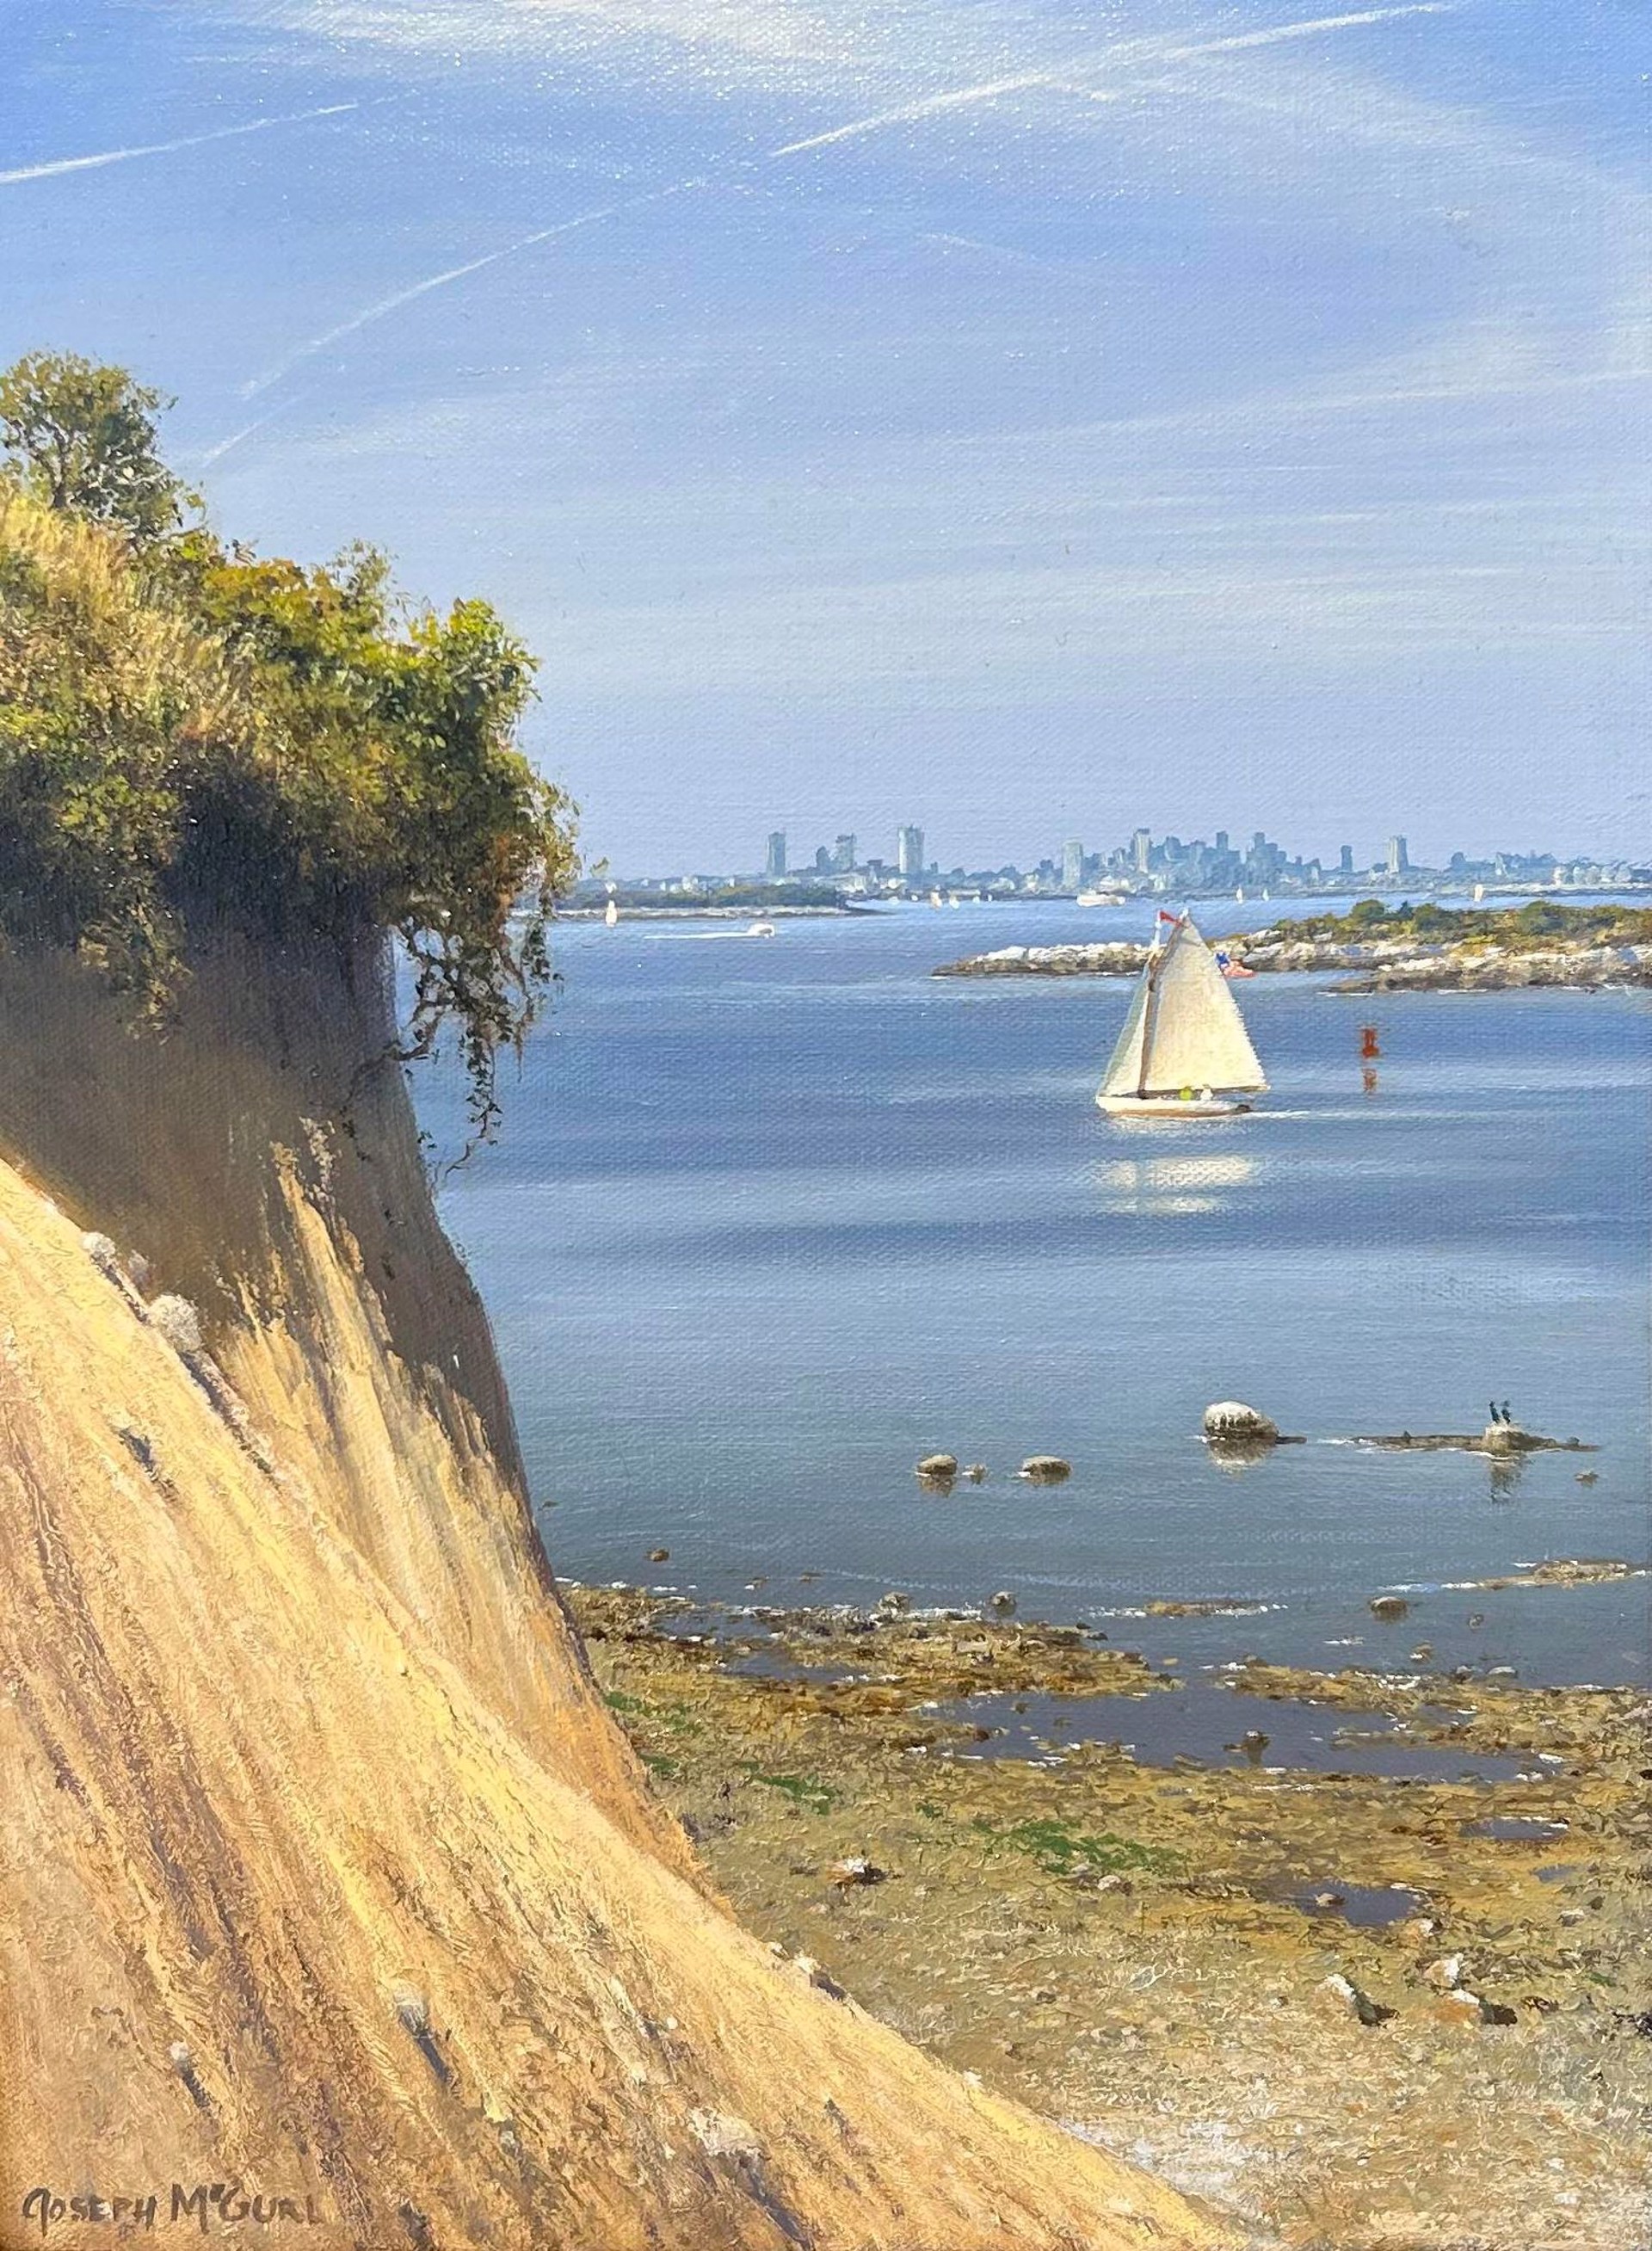 Boston Harbor Islands Project: Low Tide at Great Brewster Island by Joseph McGurl